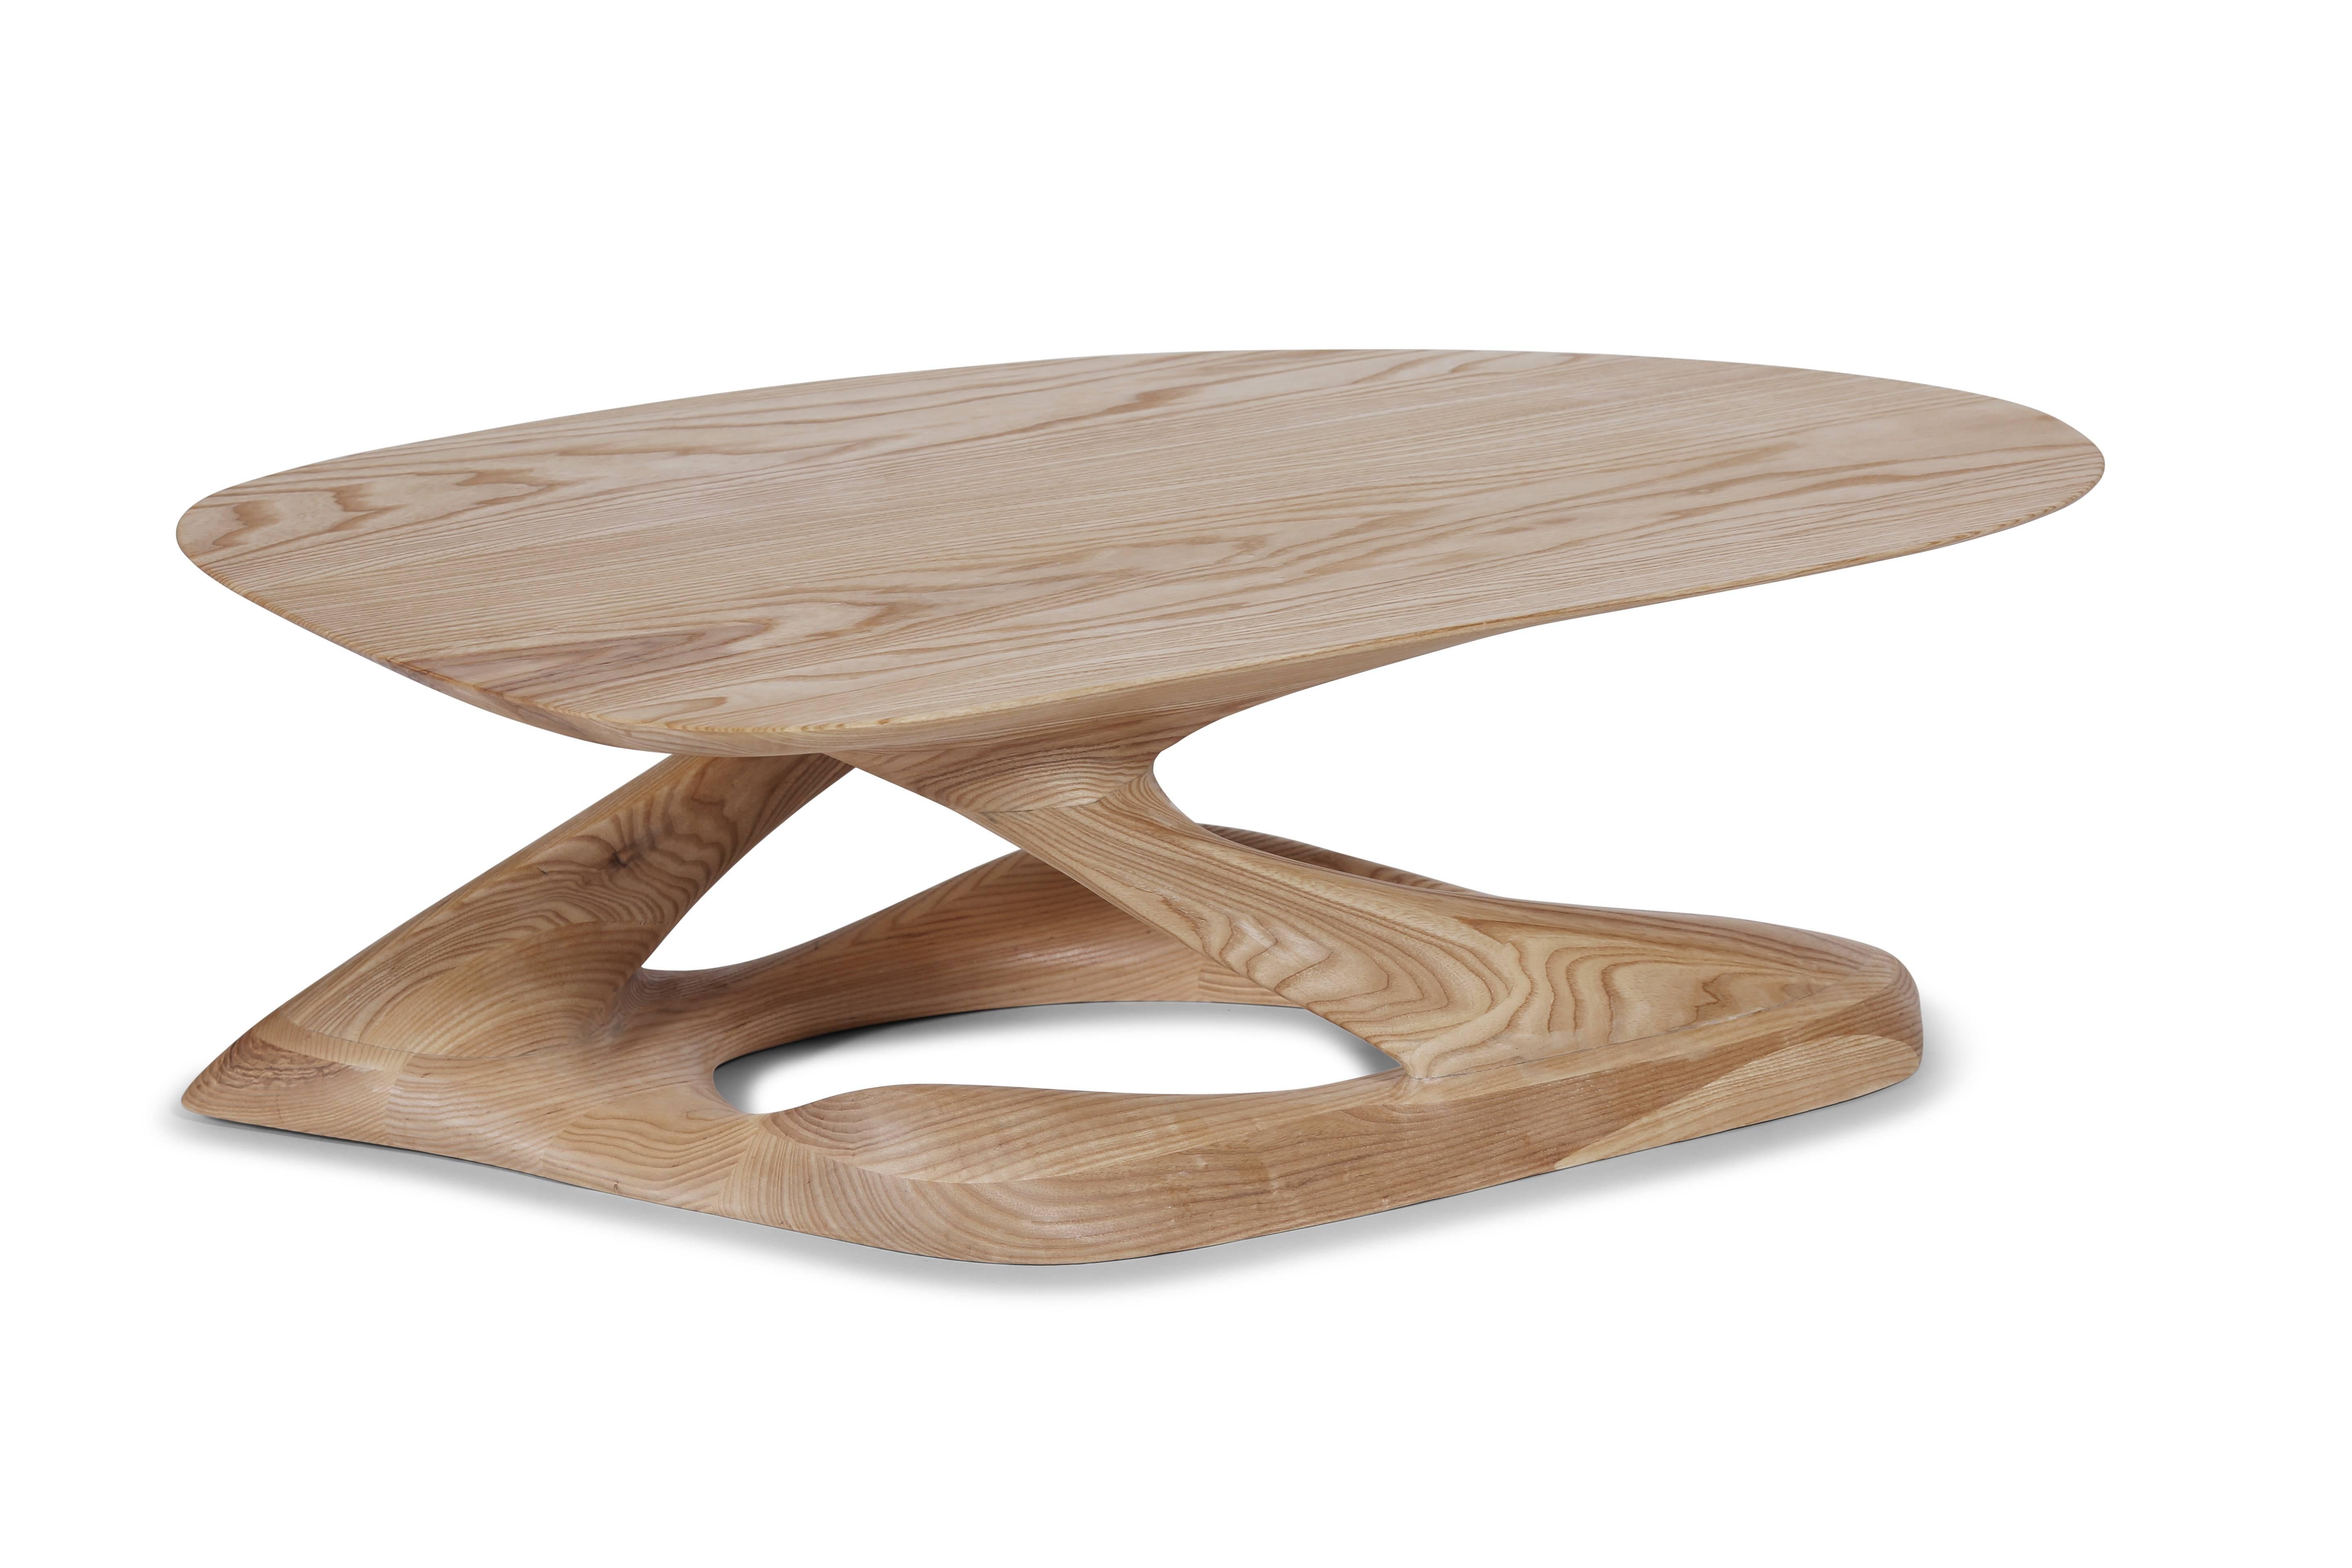 Modern Amorph Plie modern coffee table in Honey stain in Ash wood For Sale